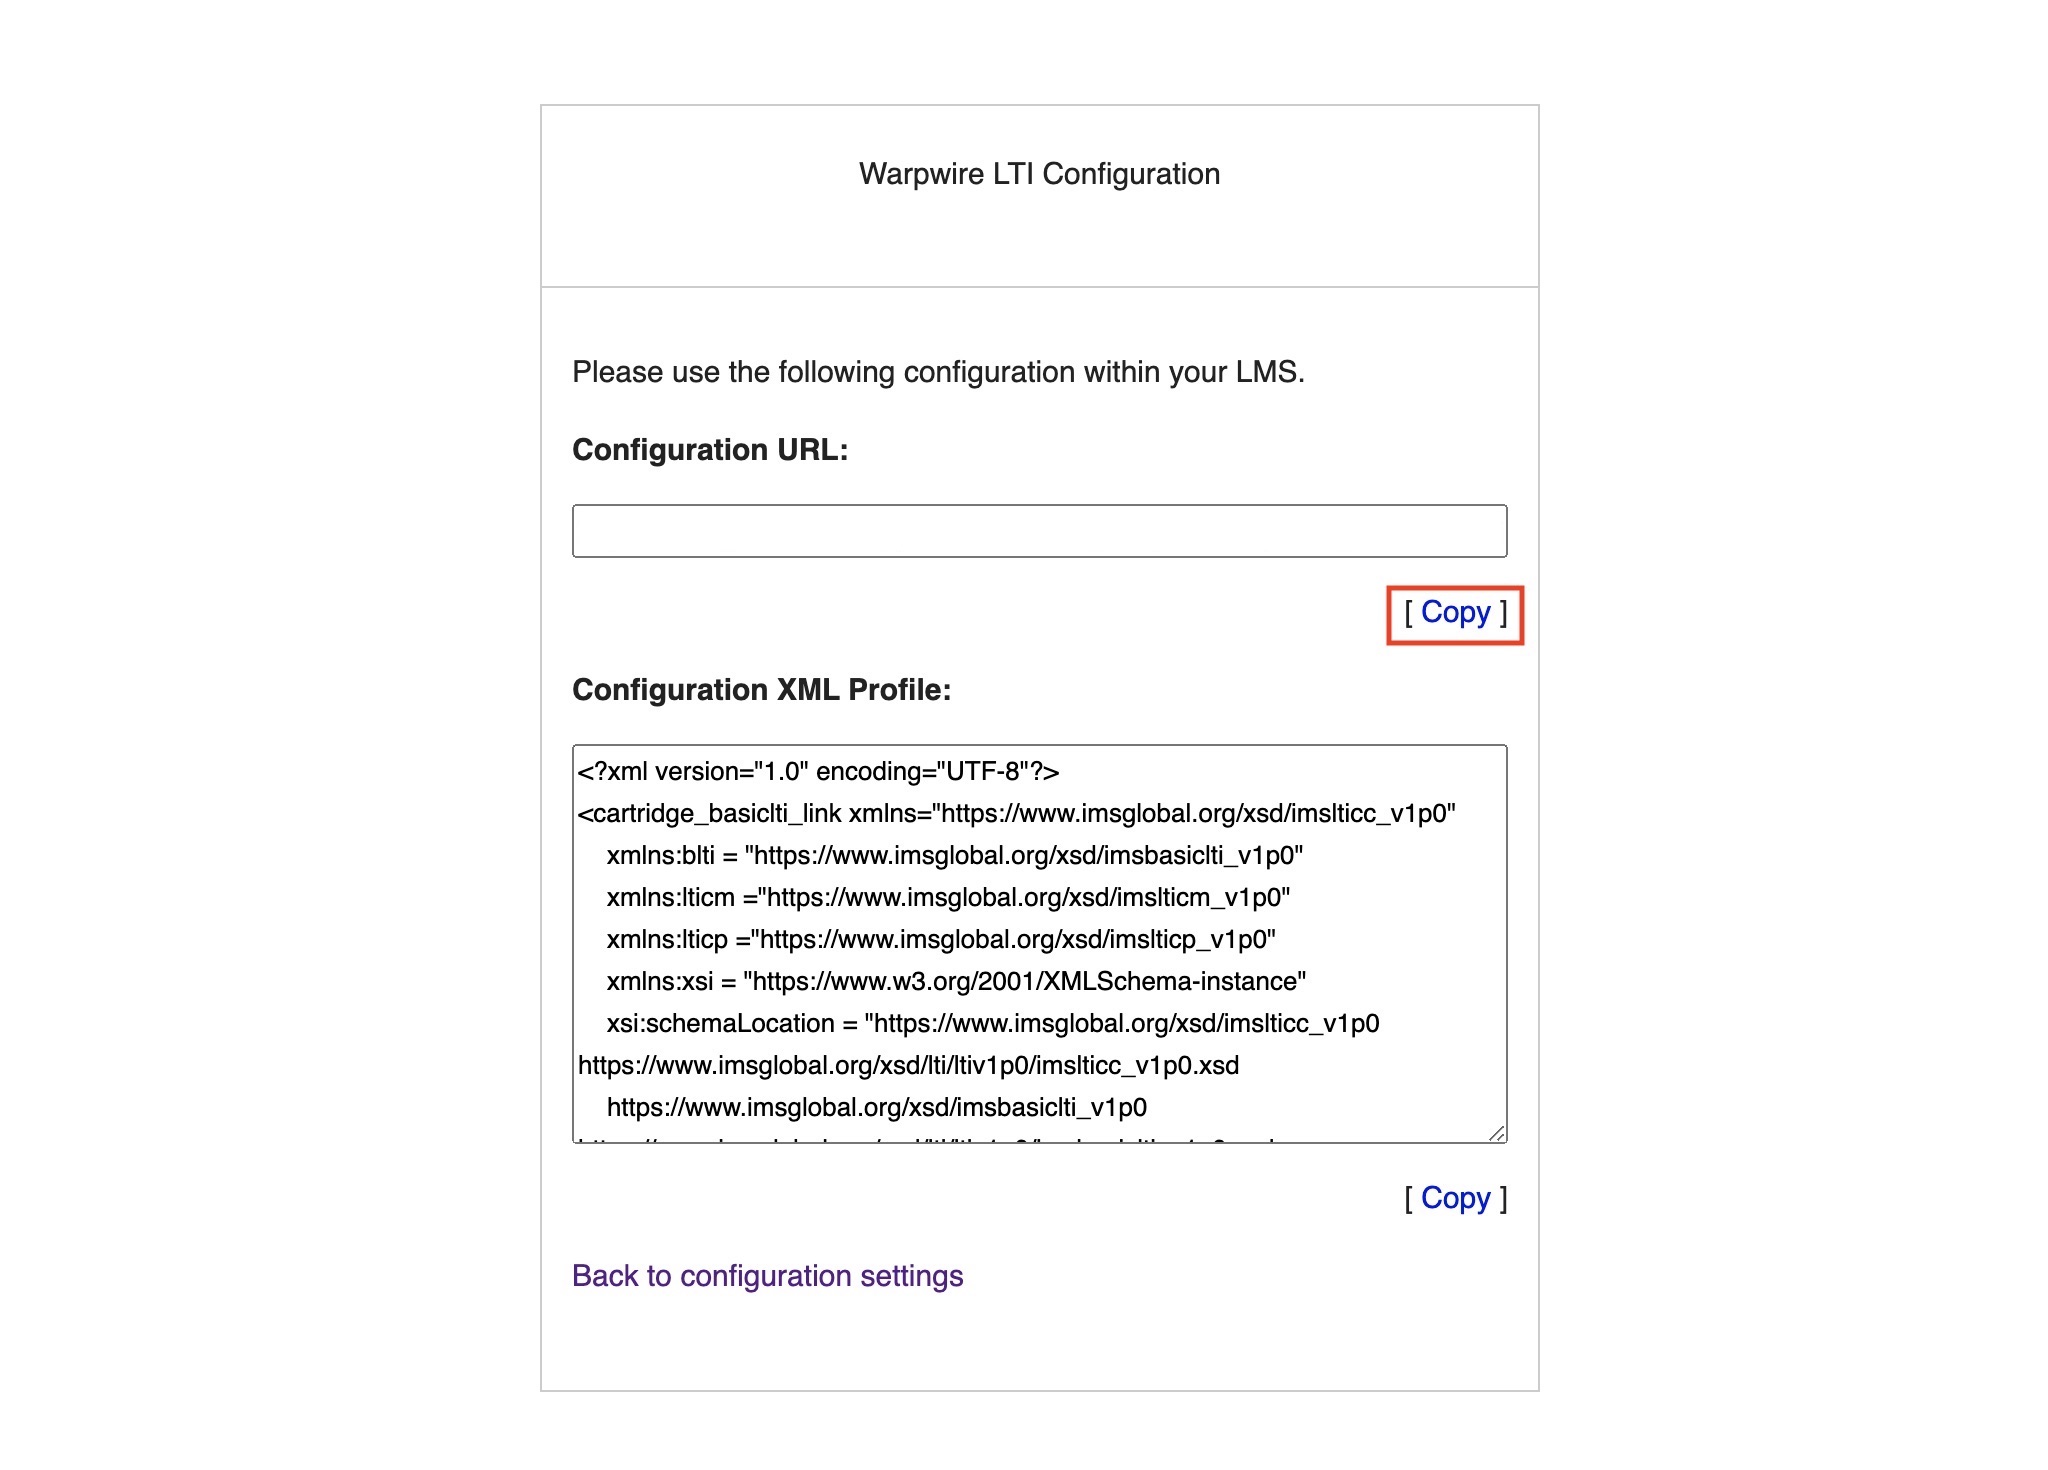 xml page generated via configuration settings page